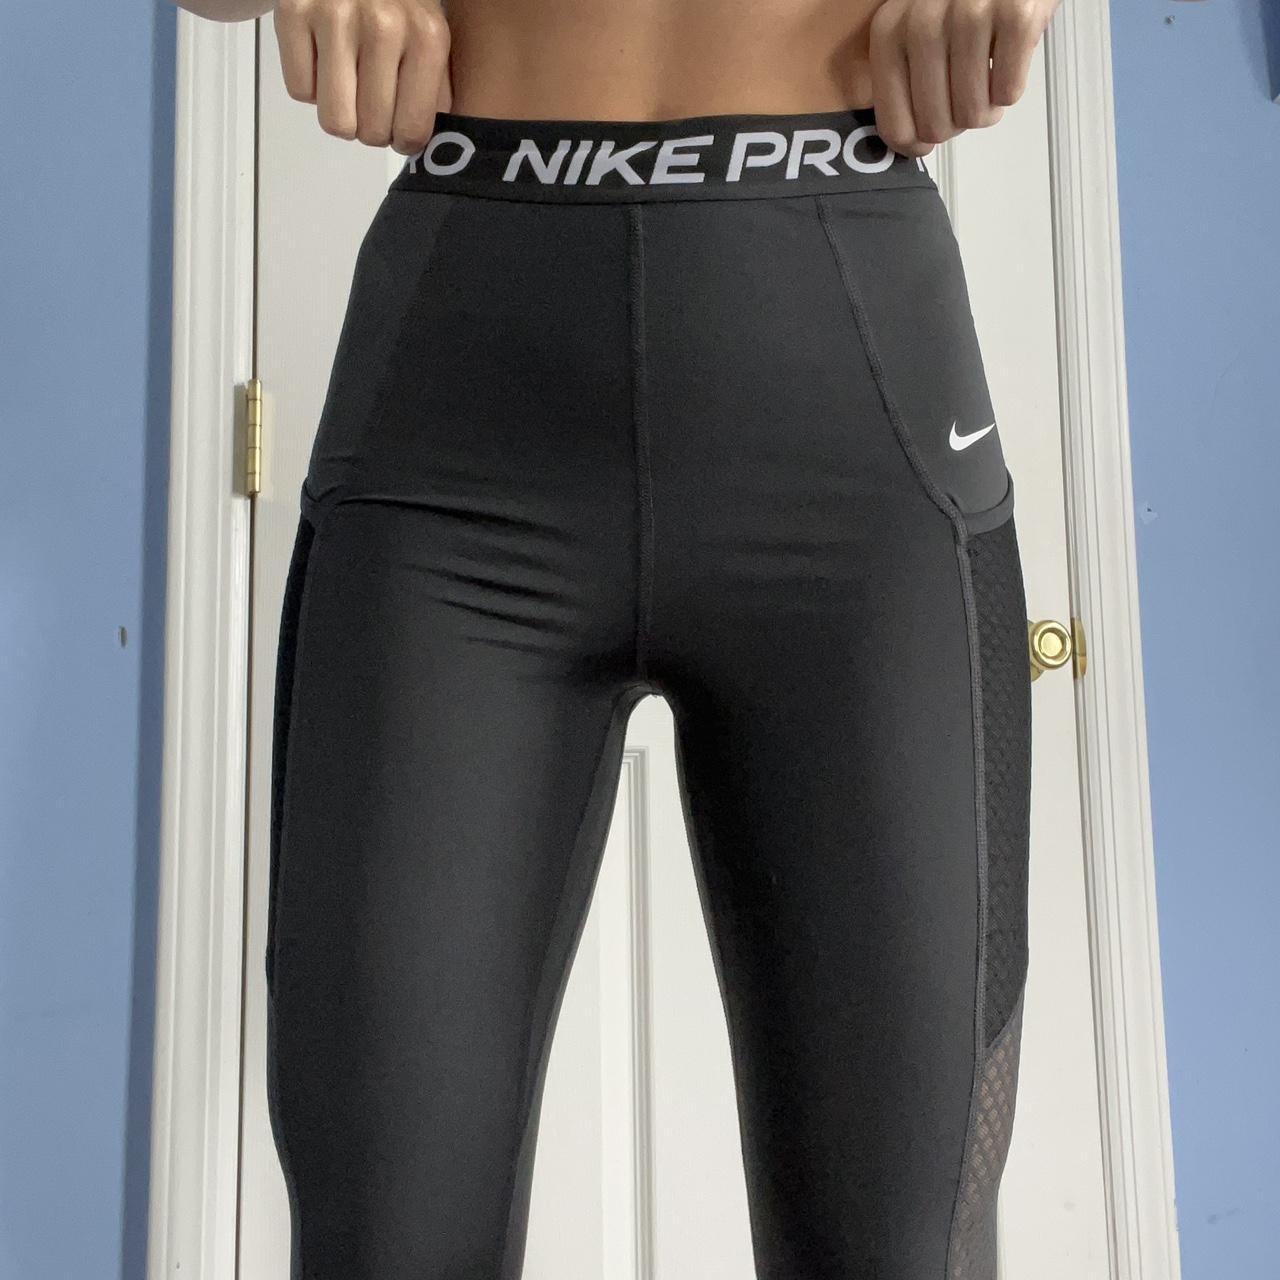 Nike Pro running leggings / size: S (tag cut out) / - Depop